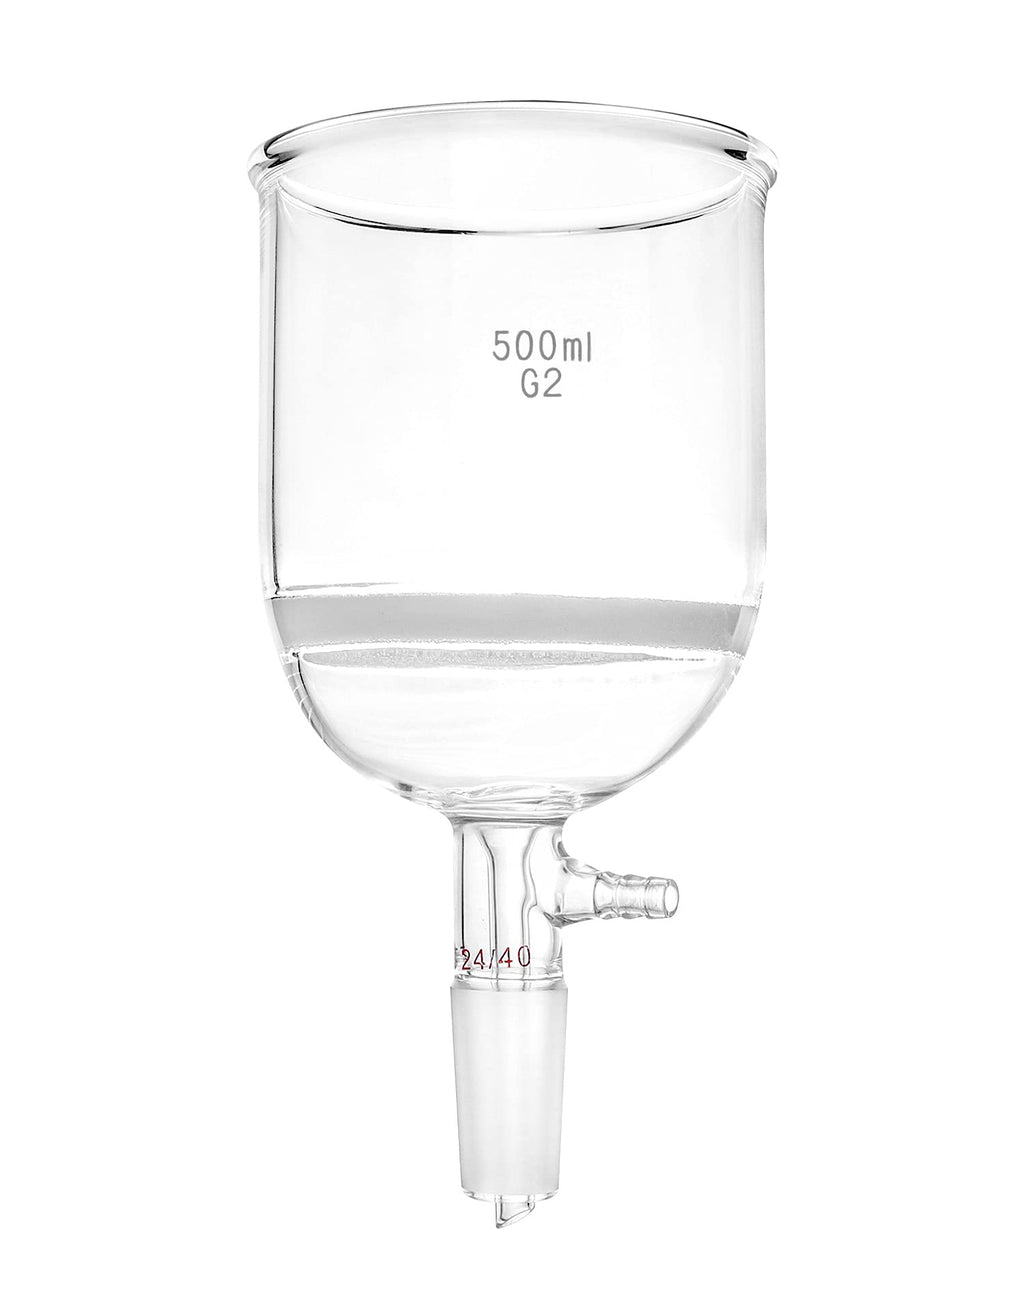 QWORK 500ml Filtering Buchner Funnel Medium Frit (G2) Lab Glassware with Standard 24/40 Joint and Vacuum Serrated Tubulation, 94mm I.D, 100mm Depth 500 ML